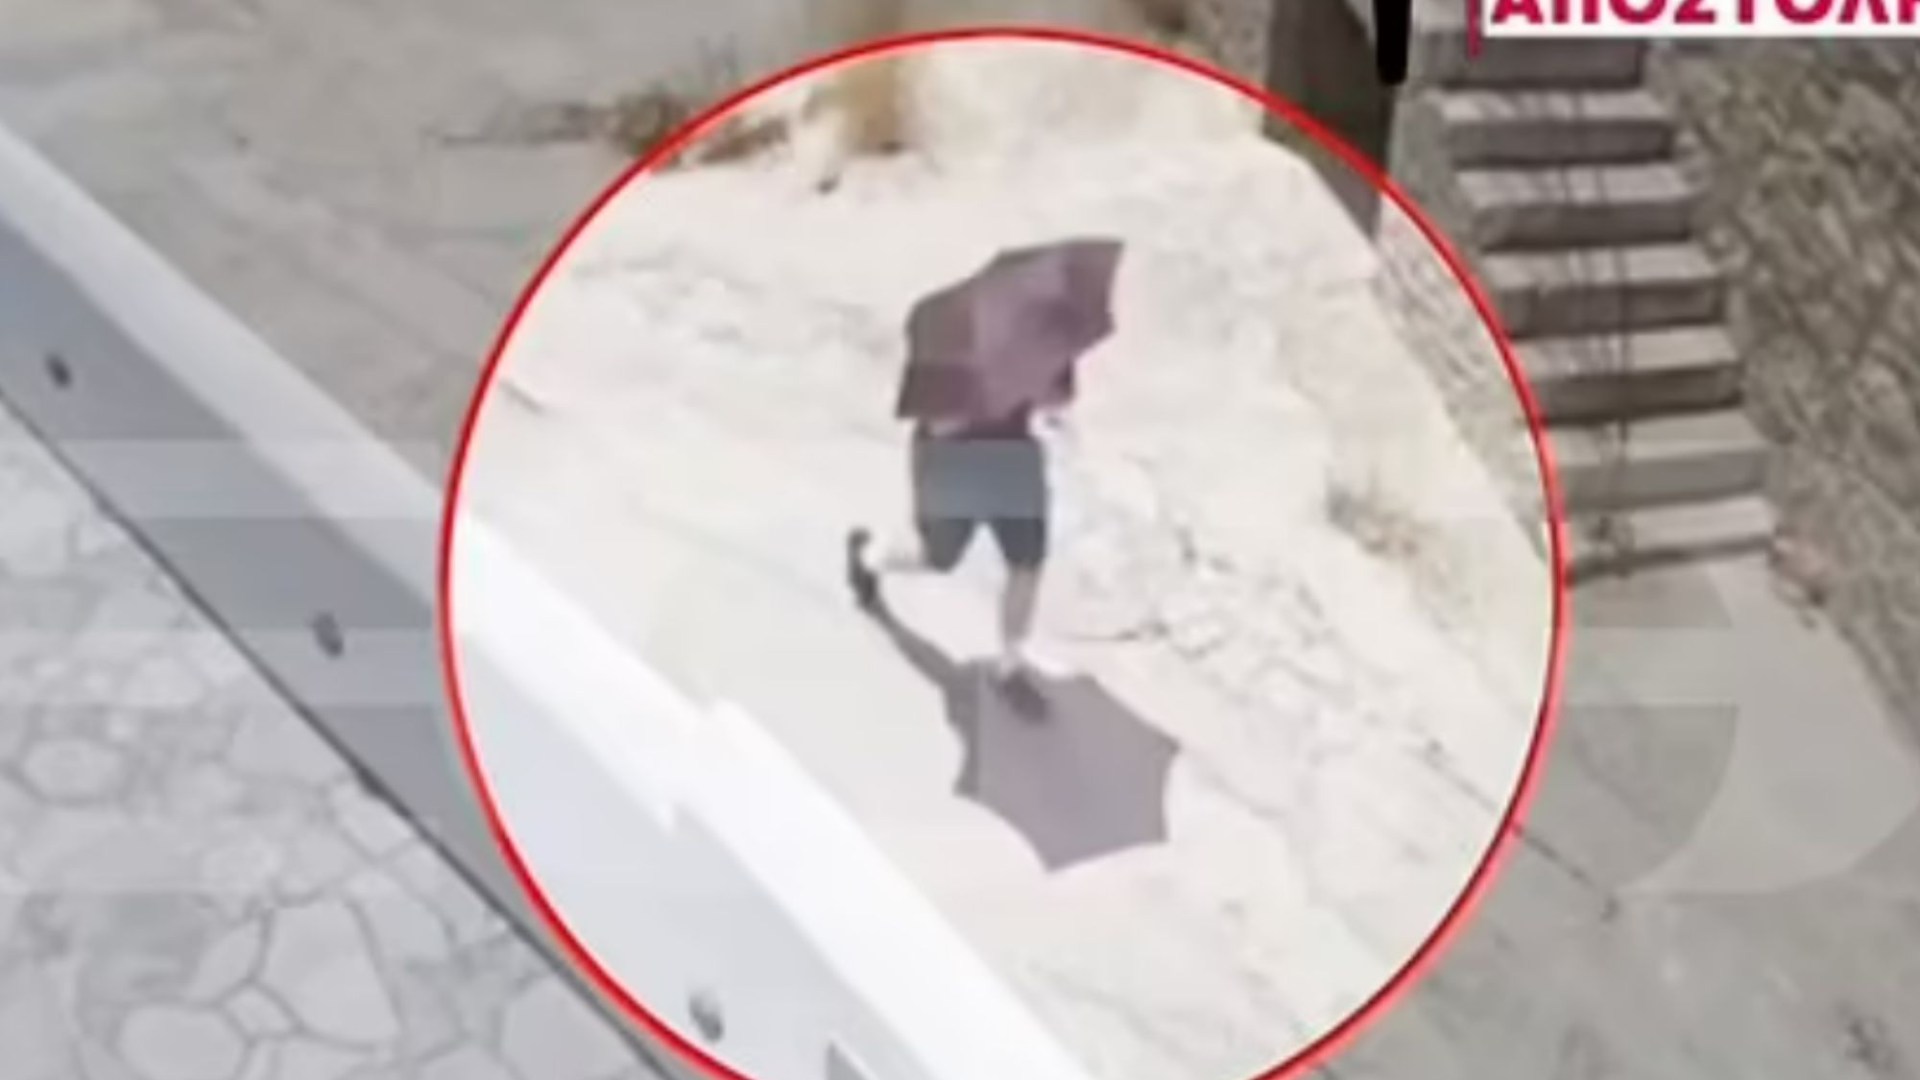 New CCTV shows Dr Michael Mosley on tragic final walk 2 hours before he died from ‘heat exhaustion’ [Video]